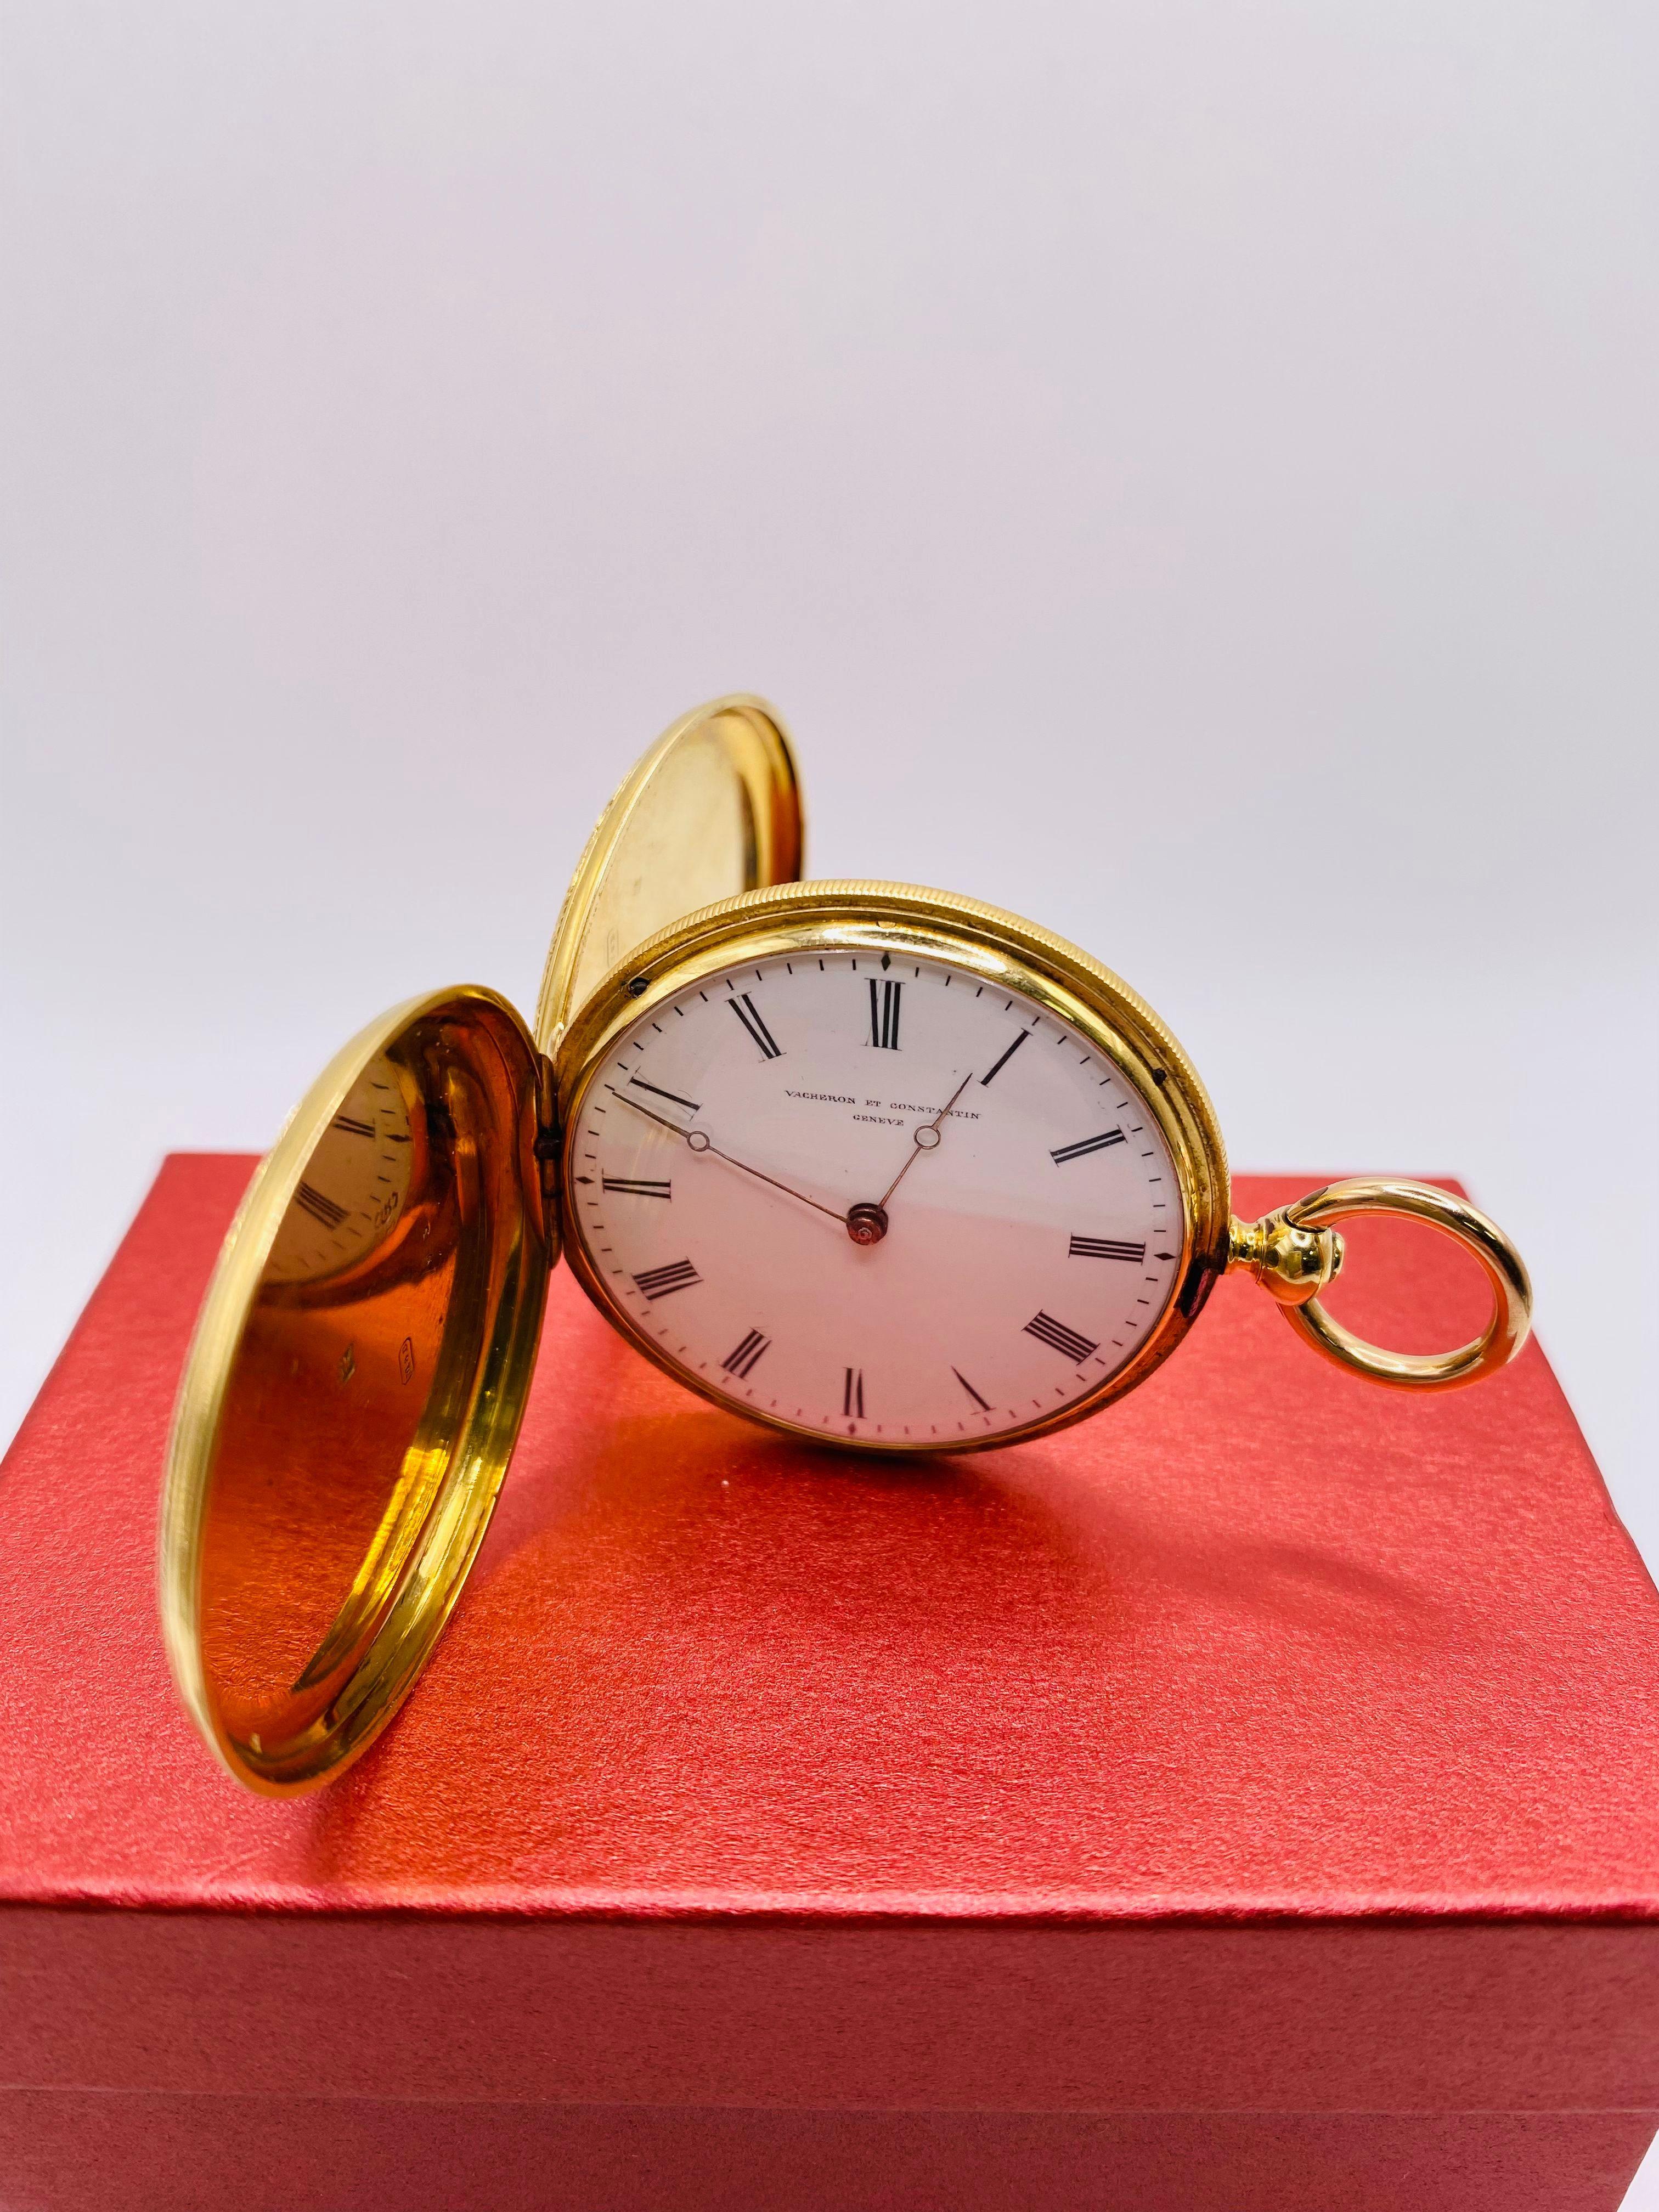 Vacheron & Constantine 36.5 mm Pocket Watch. 18k Yellow Gold with key. Made in Geneva-Swiss made. Detatched lever. Thirteen Jewels. No. 71893
